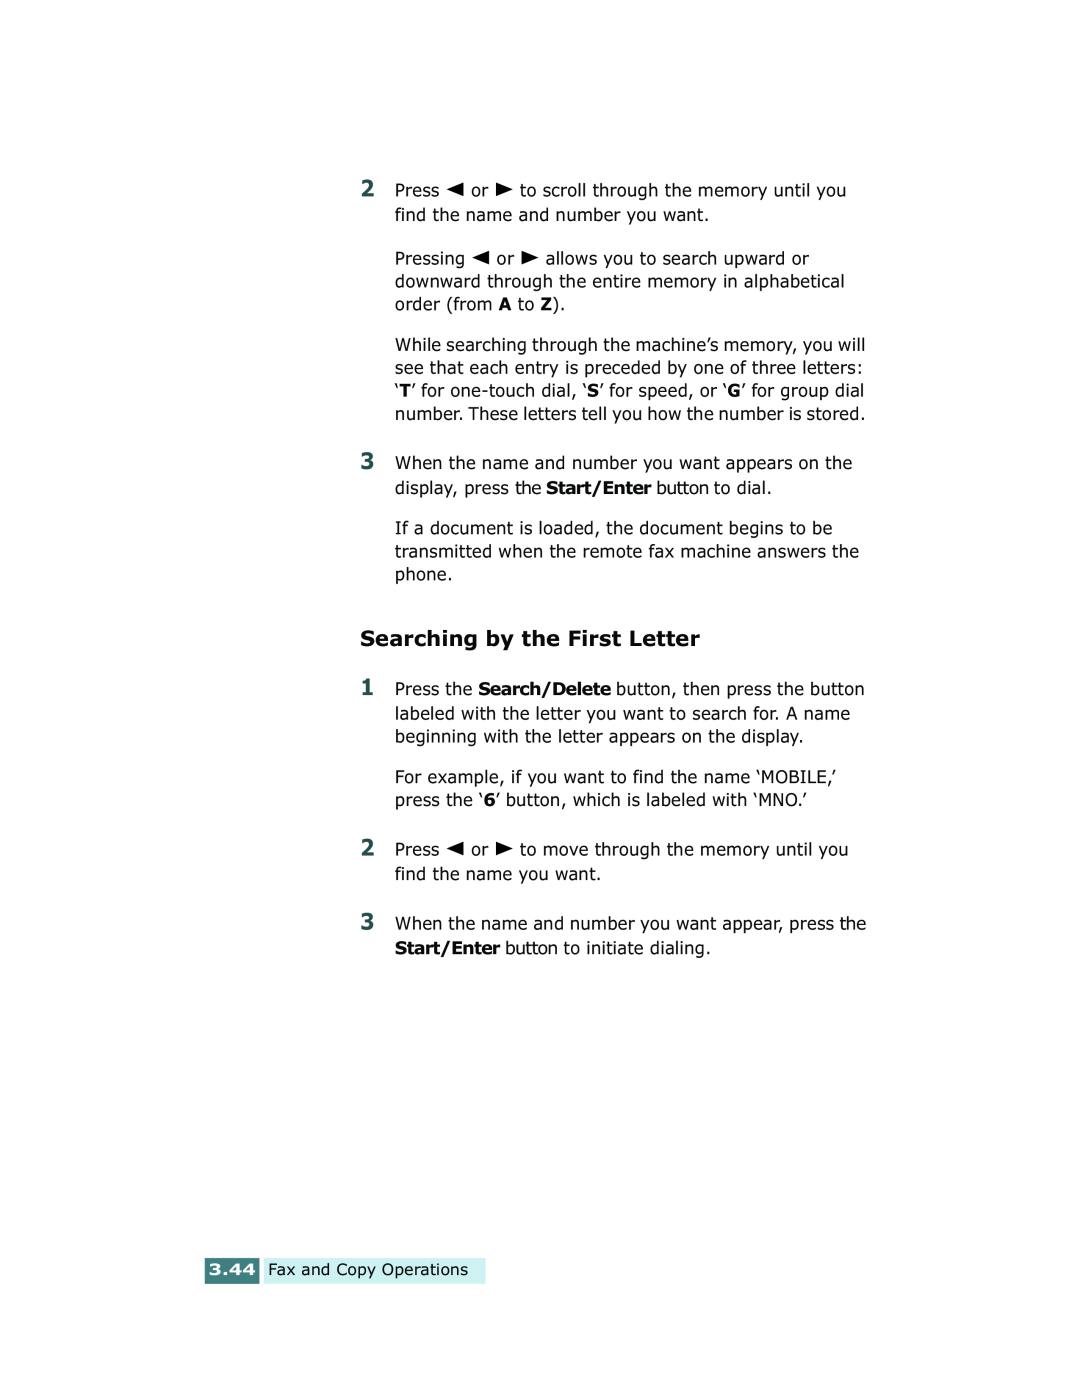 Xerox Pro 580 manual Searching by the First Letter 